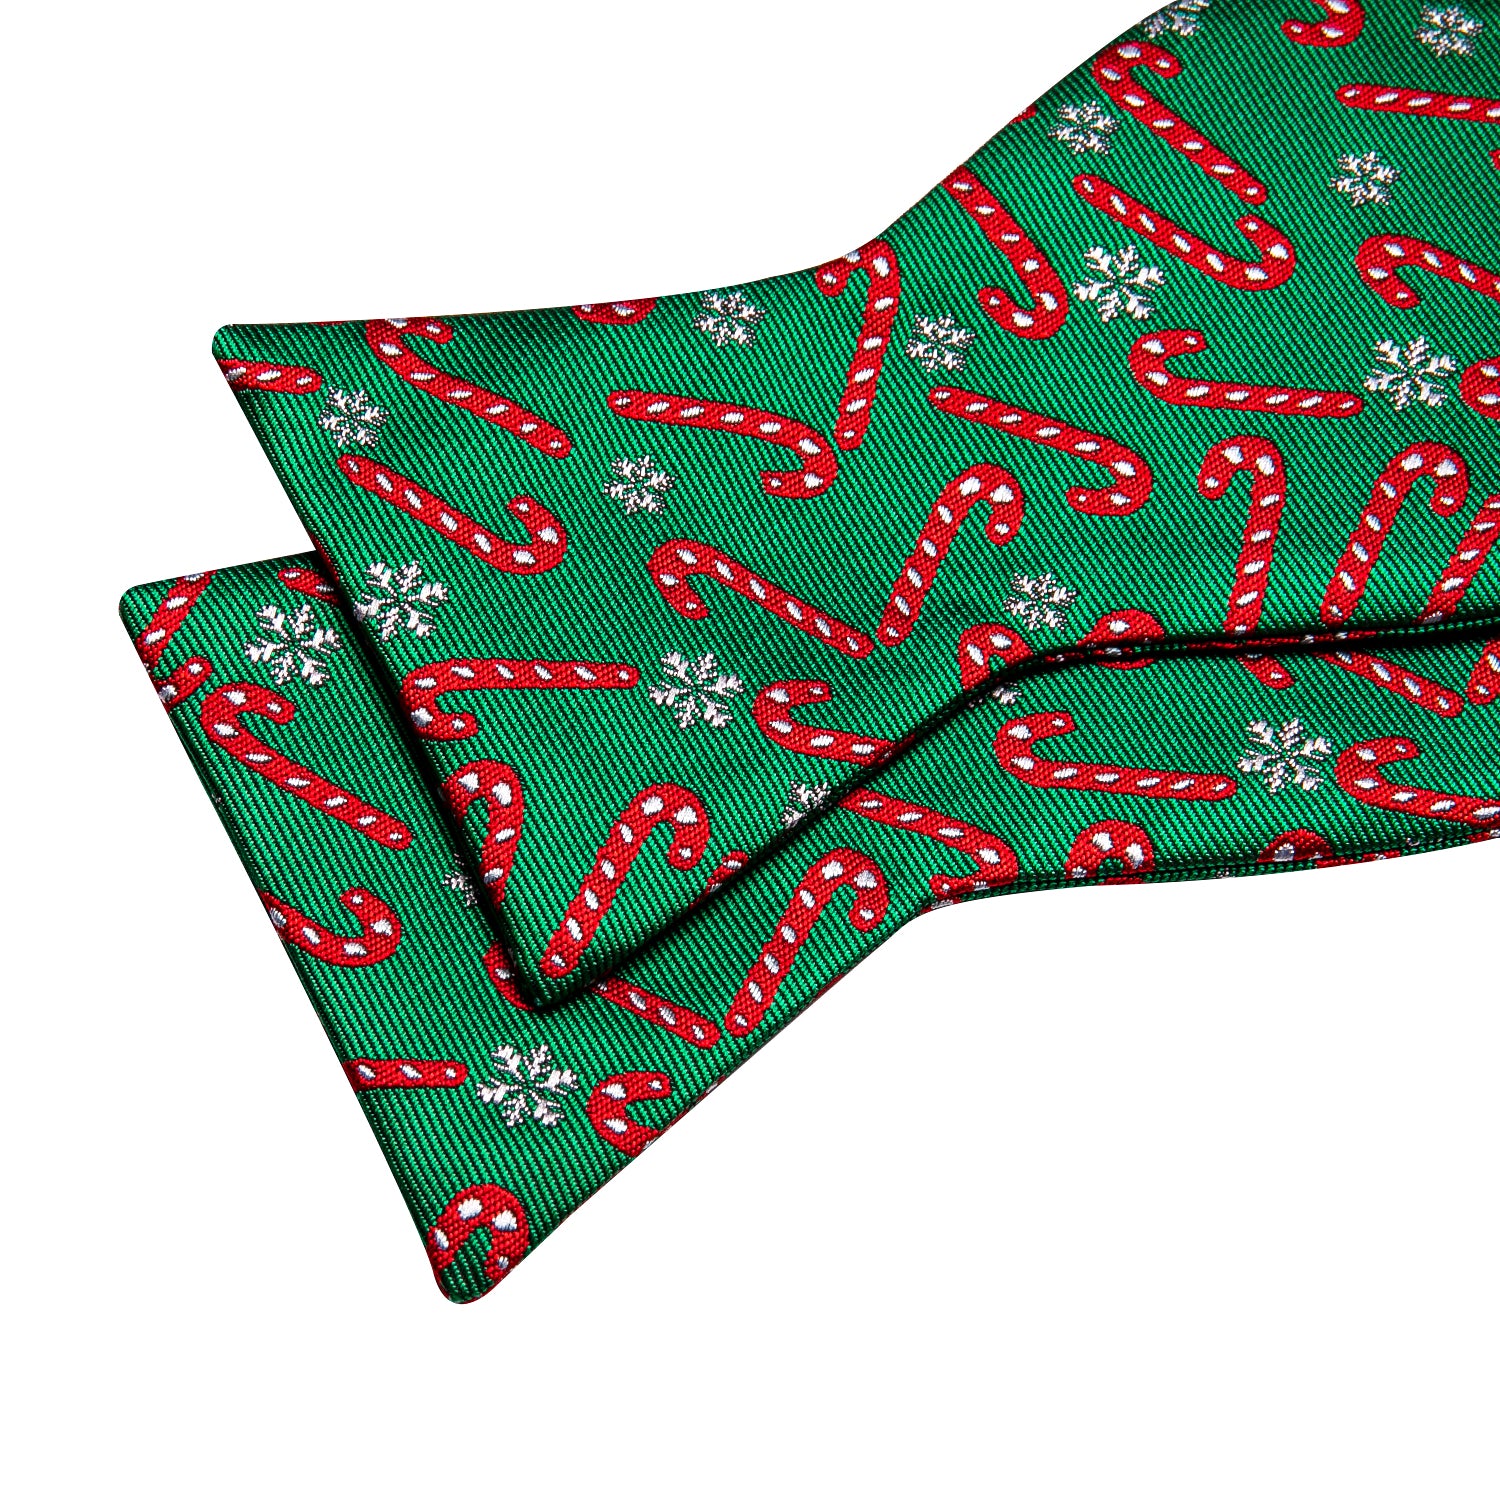 Barry Wang Christmas Green Bow Tie with Candy Cane Pattern Hanky Cufflinks Set